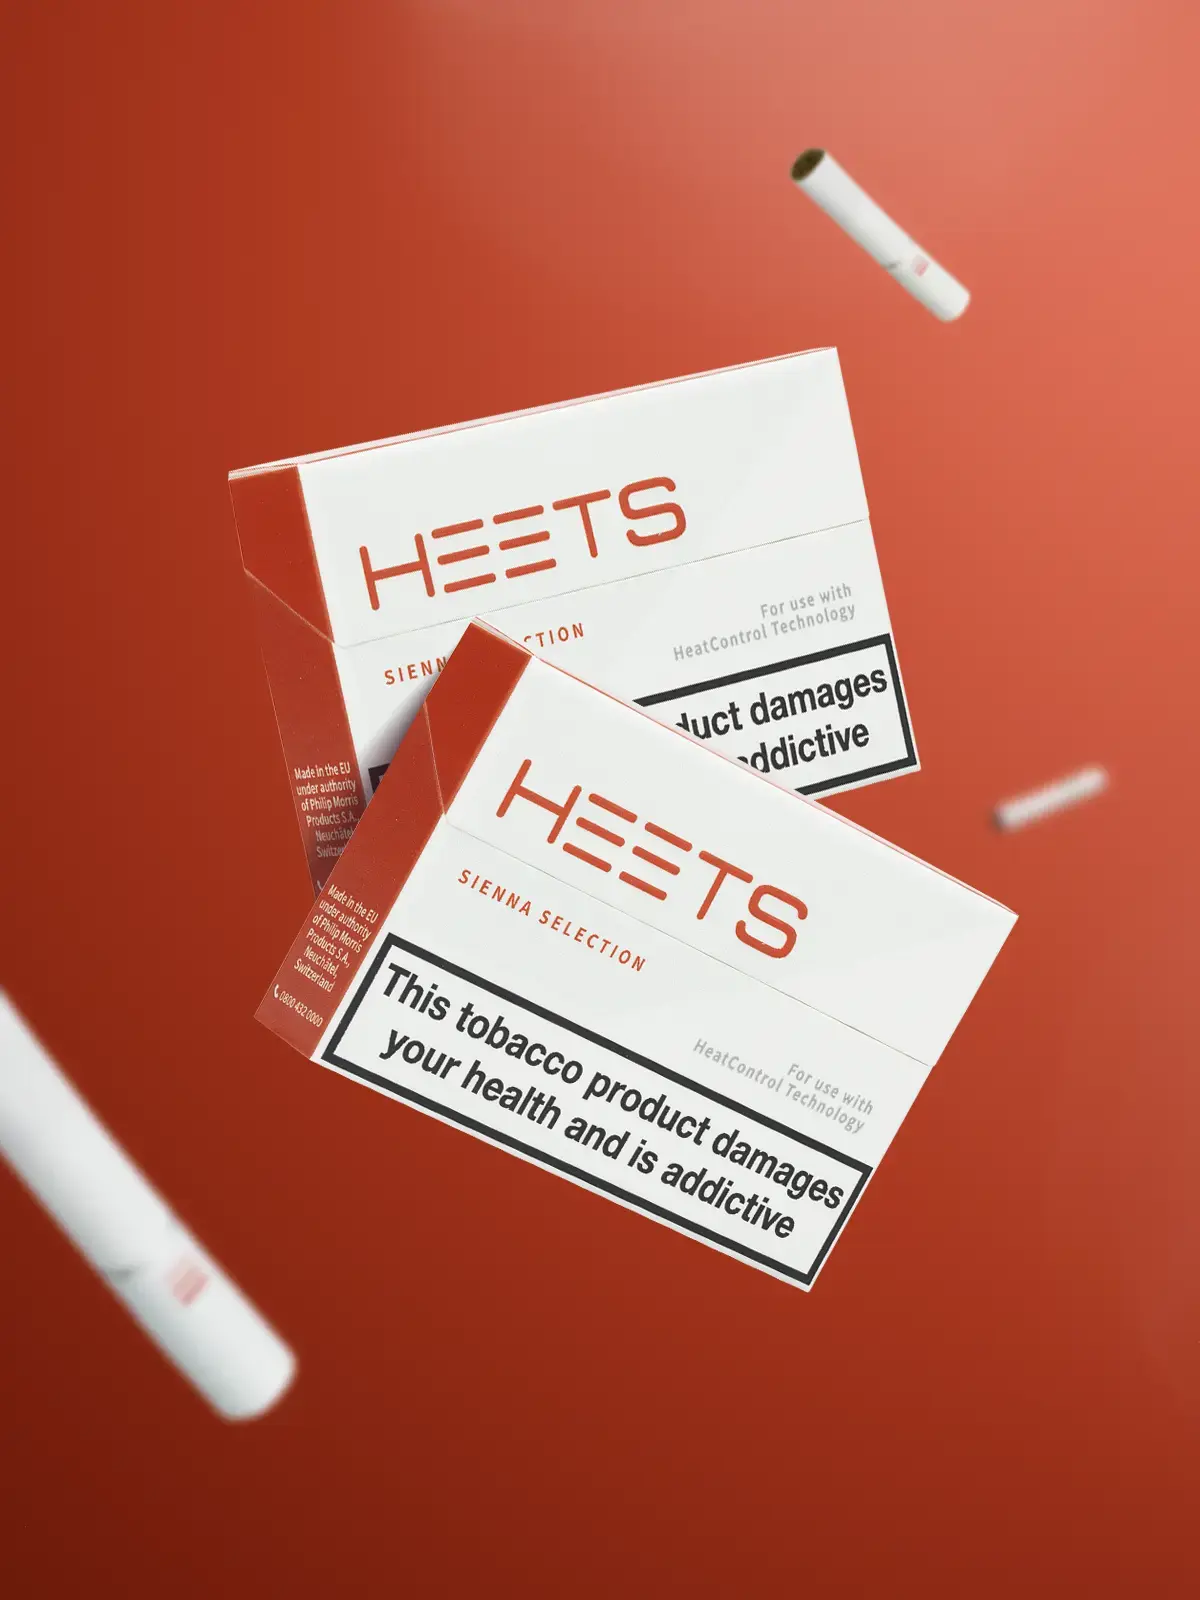 Two packs of IQOS Sienna HEETS floating in front of a red-orange background